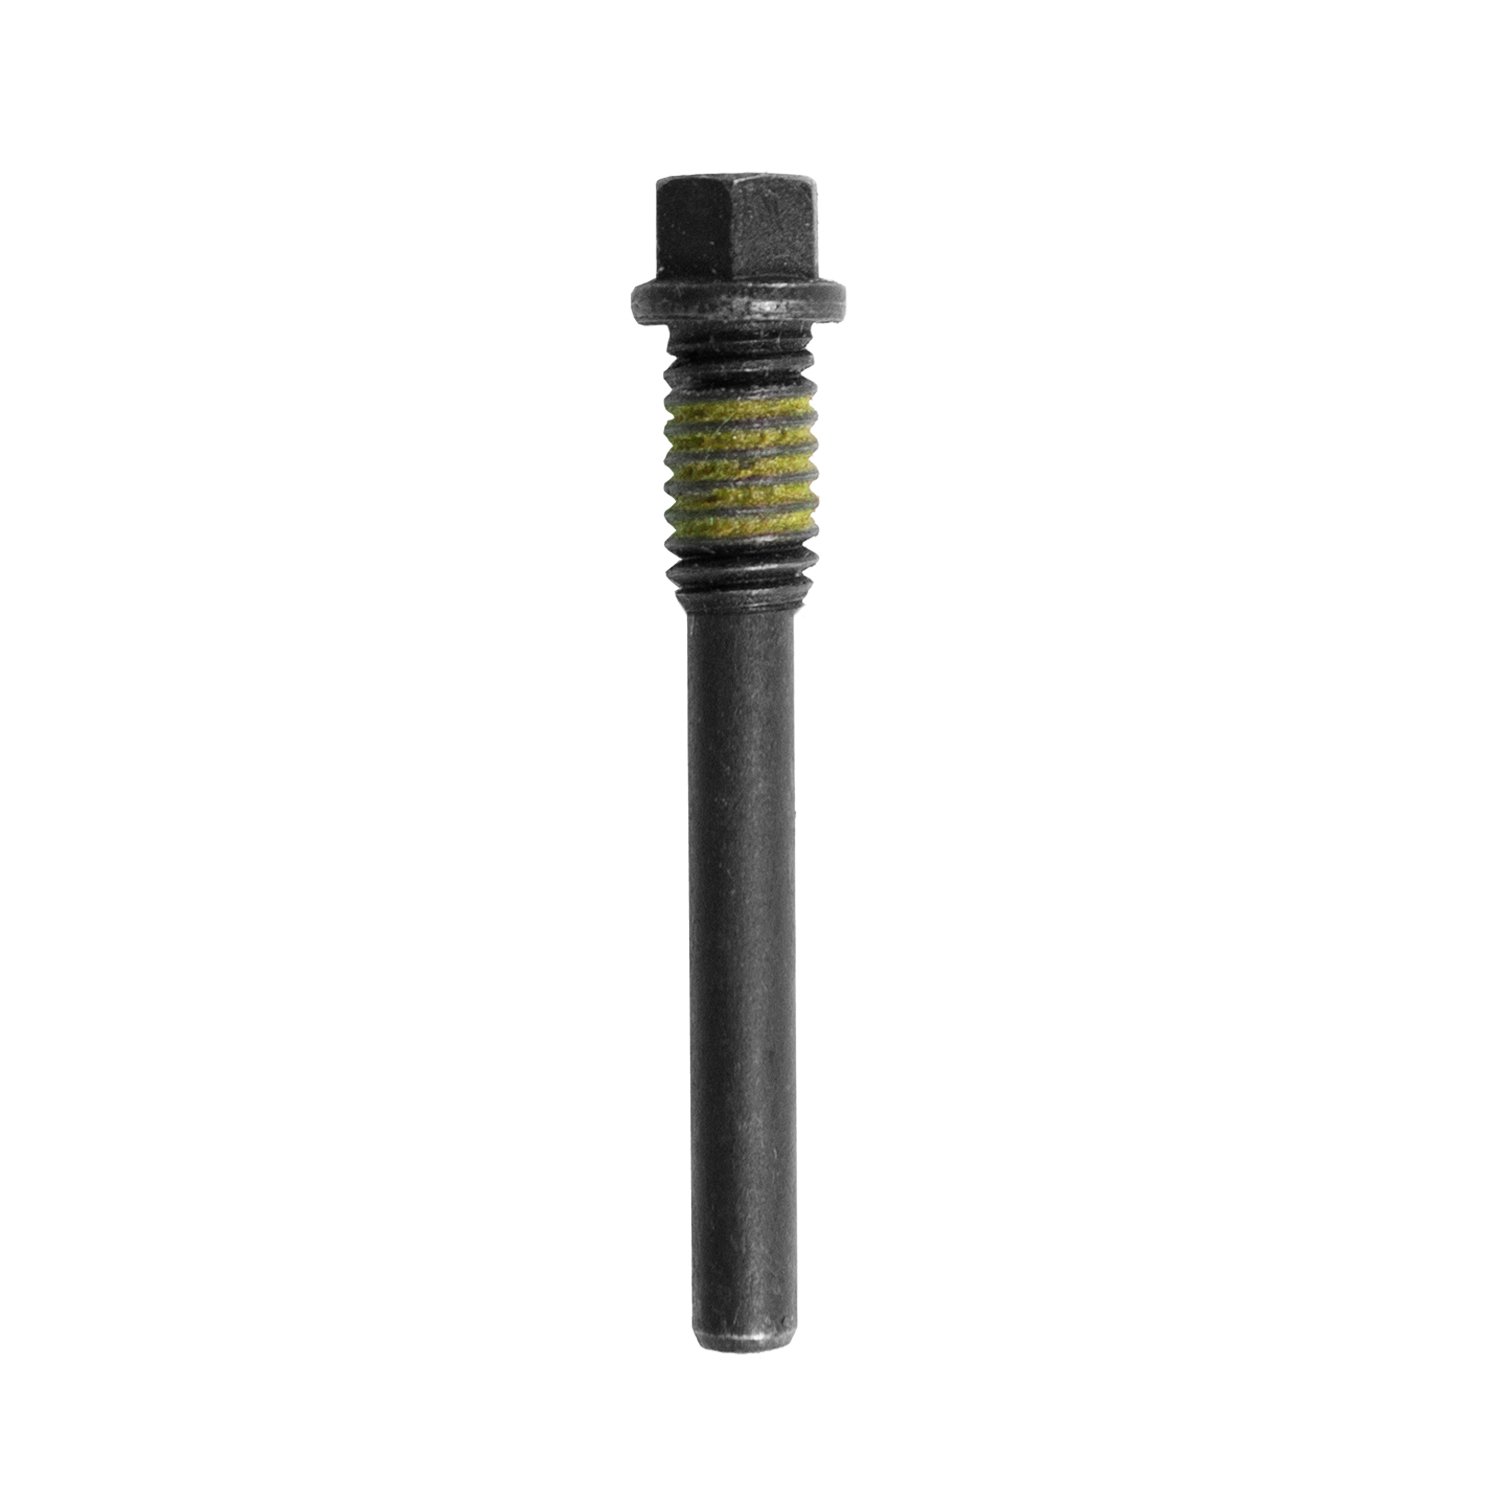 Cross Pin Bolt With 5/16 X 18 Thread For 10.25 in. Ford